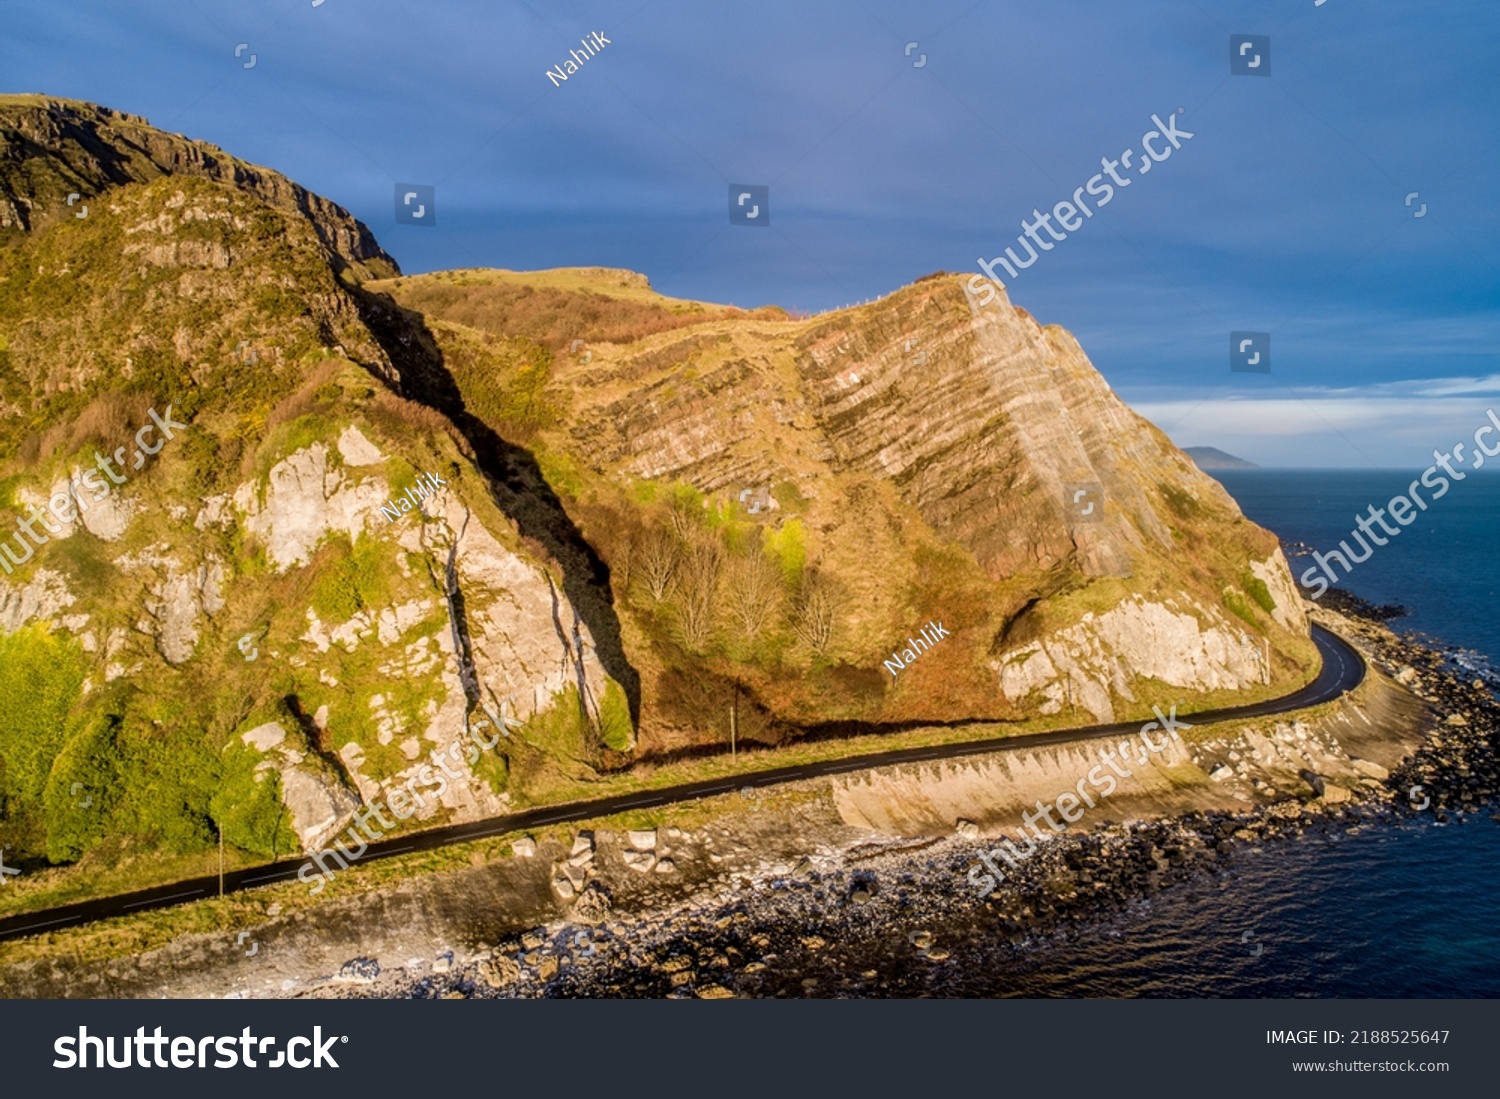 Northern Ireland, UK. Atlantic coast. Cliffs and Antrim Coast Road, a.k.a. Causeway Costal Route. One of the most scenic coastal roads in Europe. Aerial view near Garron Point in sunrise light #2188525647